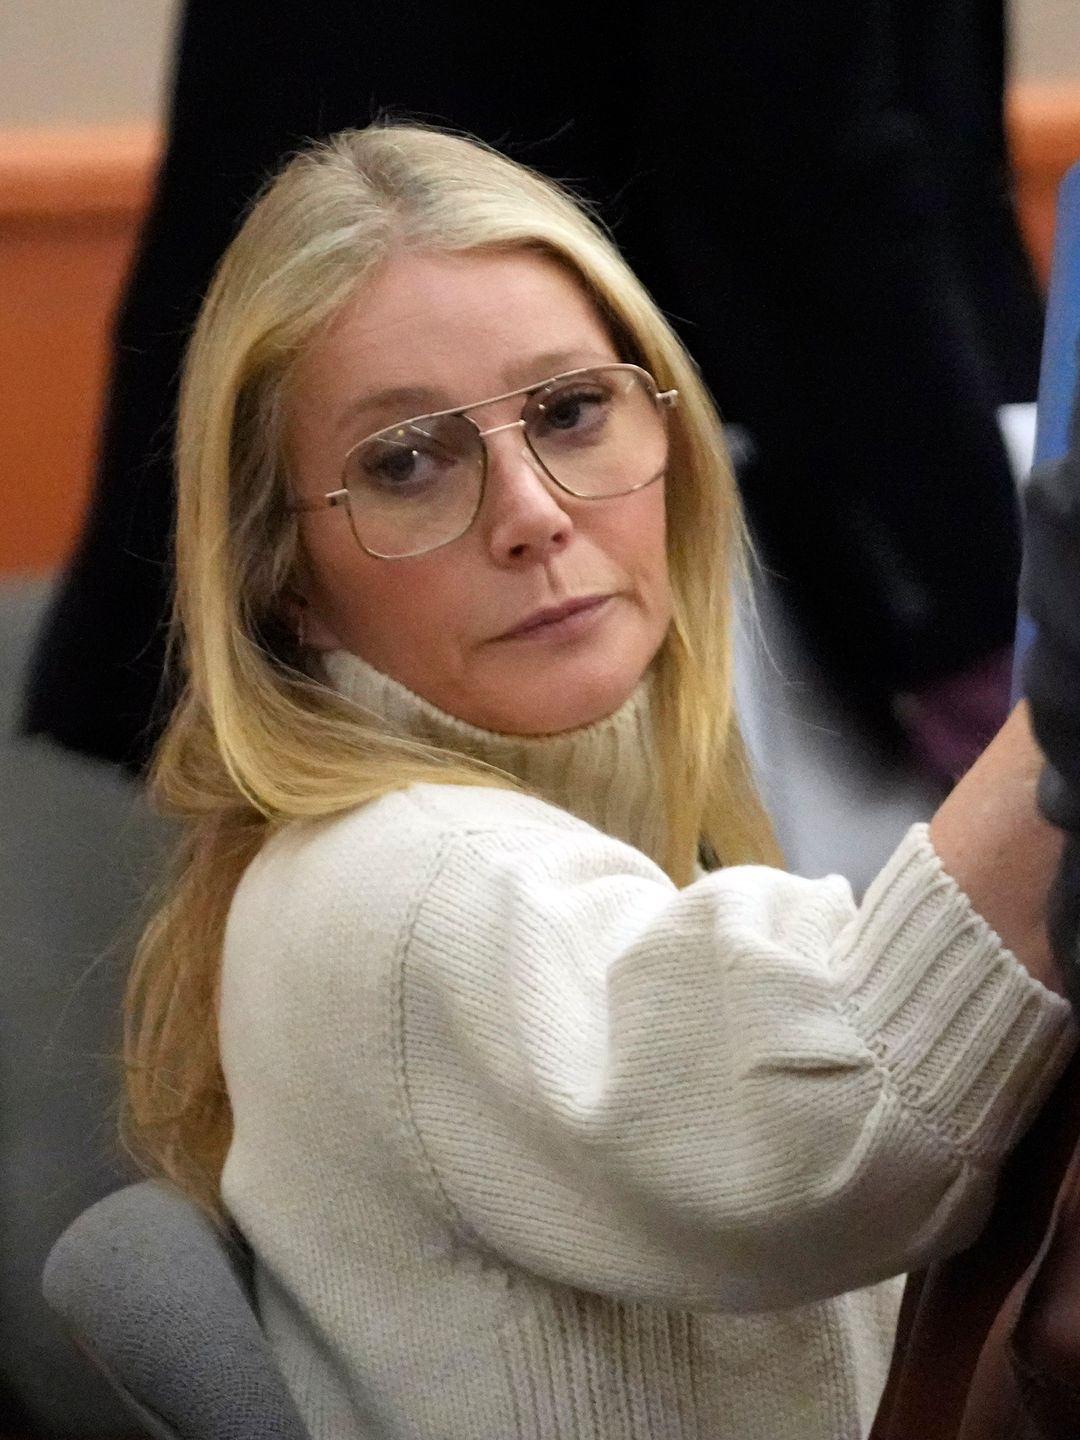 PARK CITY, UT - MARCH 21: Actress Gwyneth Paltrow looks on before leaving the courtroom, where she is accused in a lawsuit of crashing into a skier during a 2016 family ski vacation, leaving him with brain damage and four broken ribs, March 21, 2023, in P